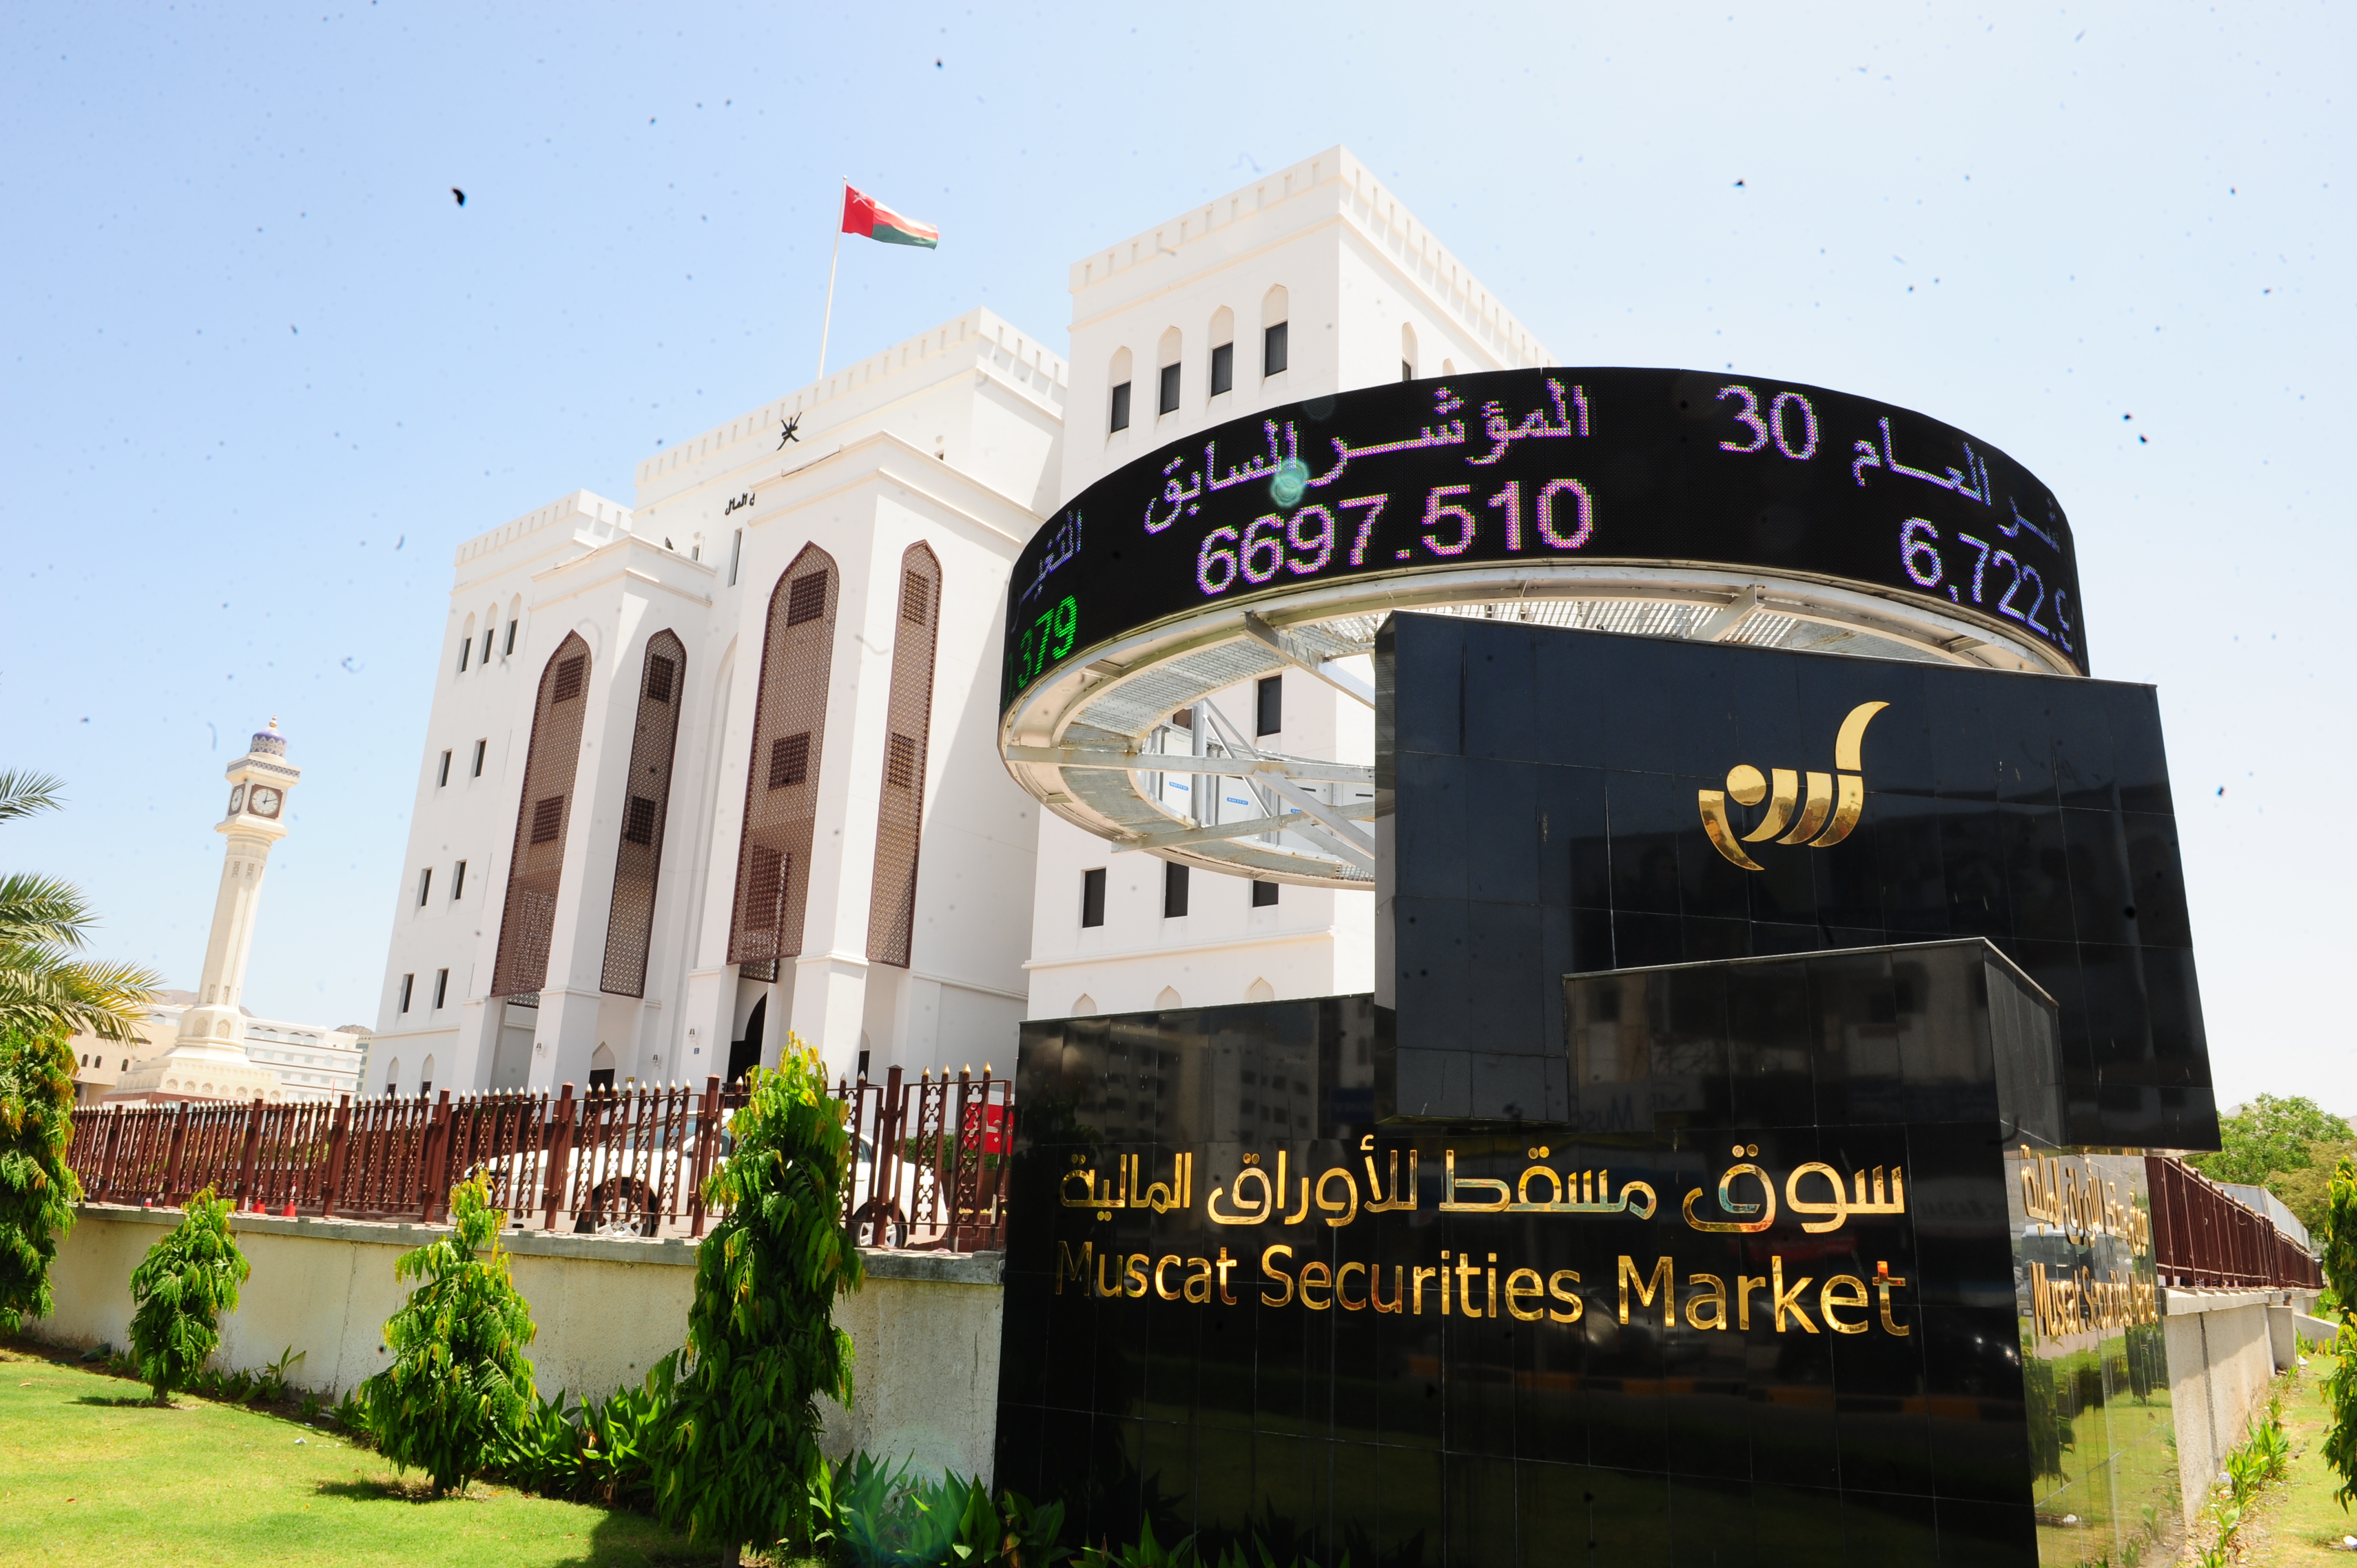 Omani firms announce better dividends